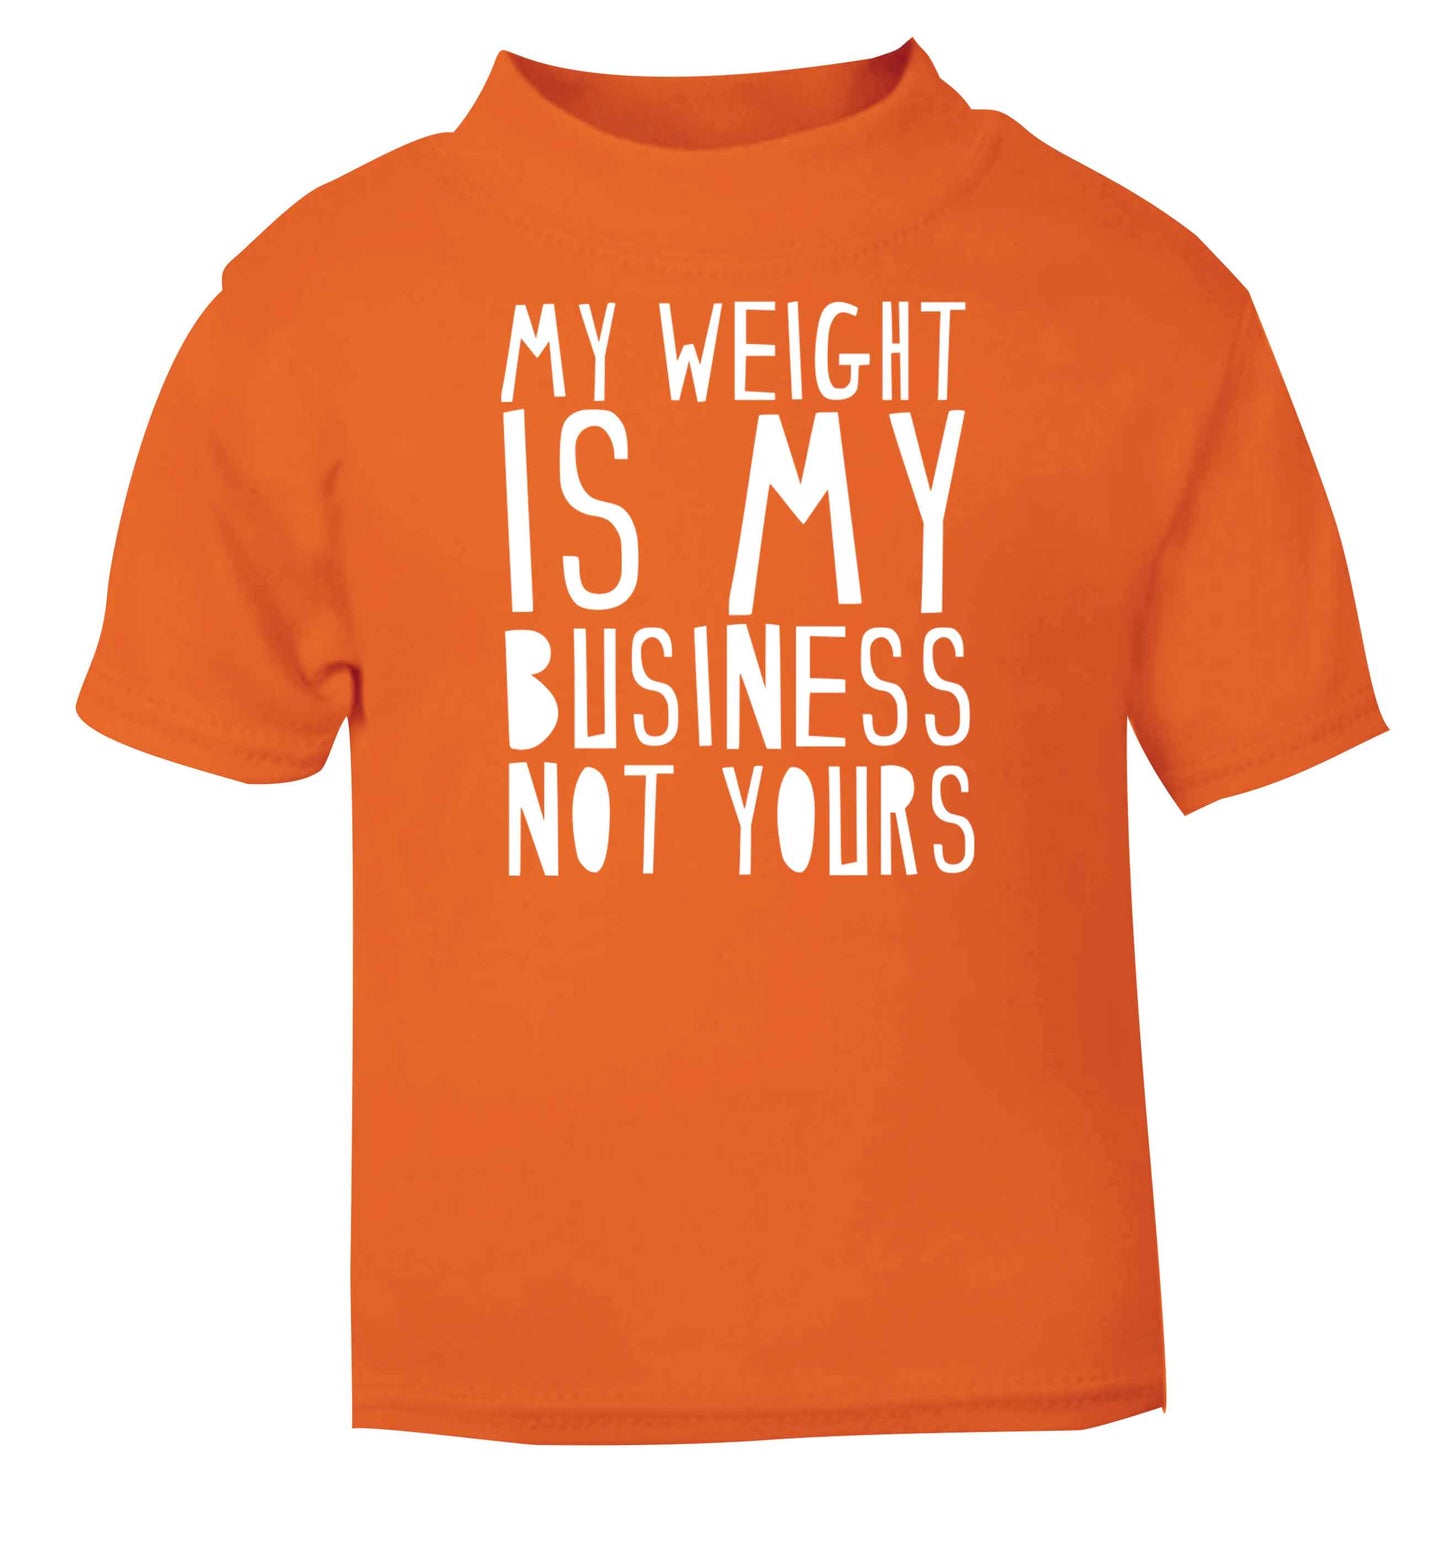 My weight is my business not yours orange baby toddler Tshirt 2 Years